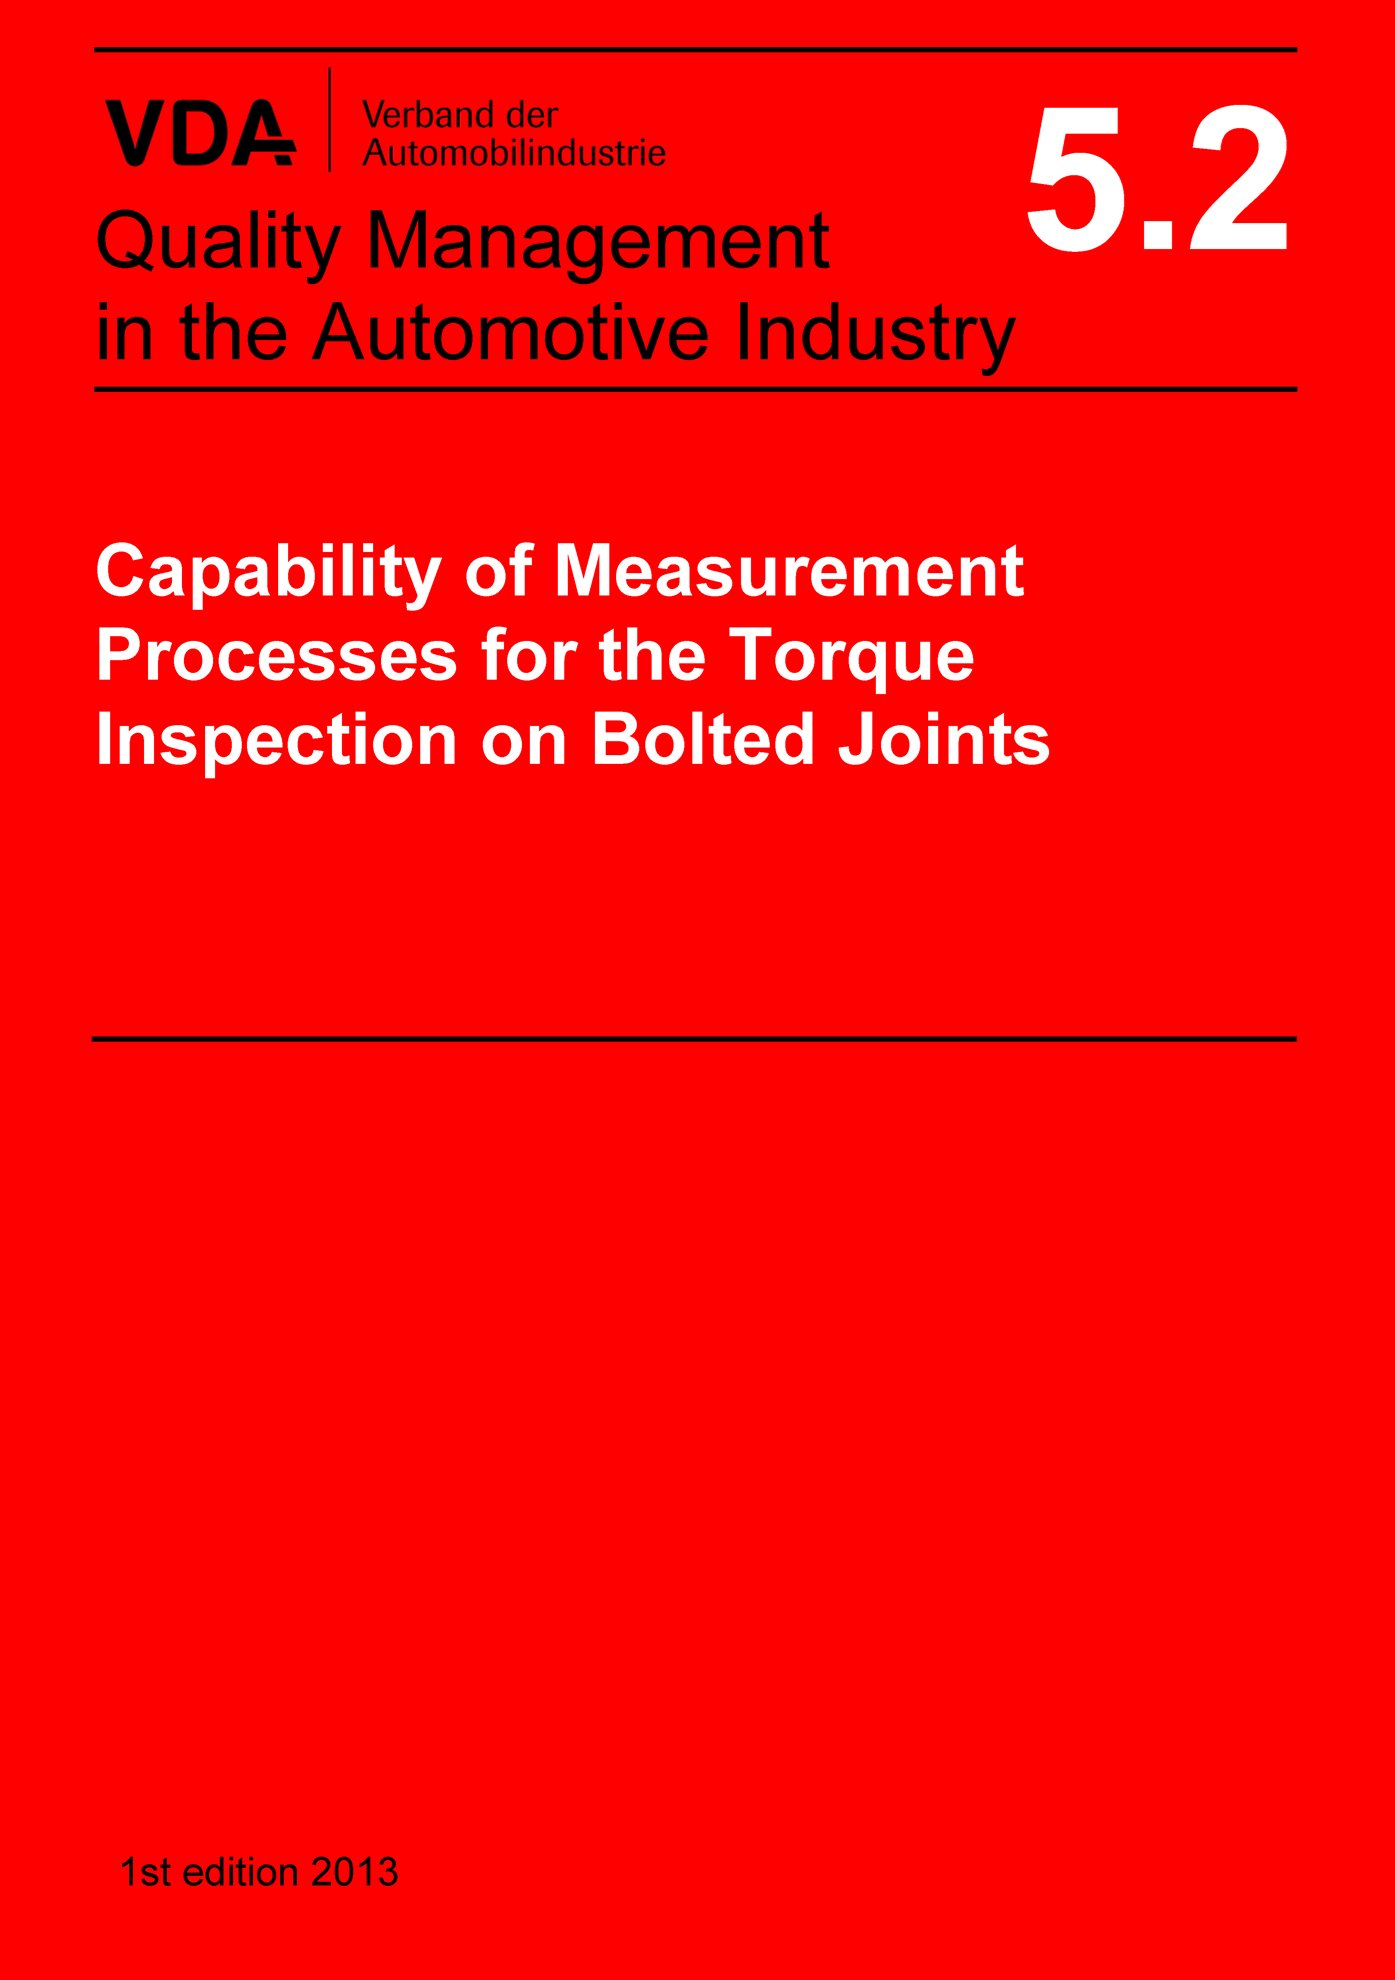 Publications  VDA Volume 5.2 - Capability of Measurement
 Processes for the Torque Inspection on Bolted Joints, 1st edition 2013 1.1.2013 preview